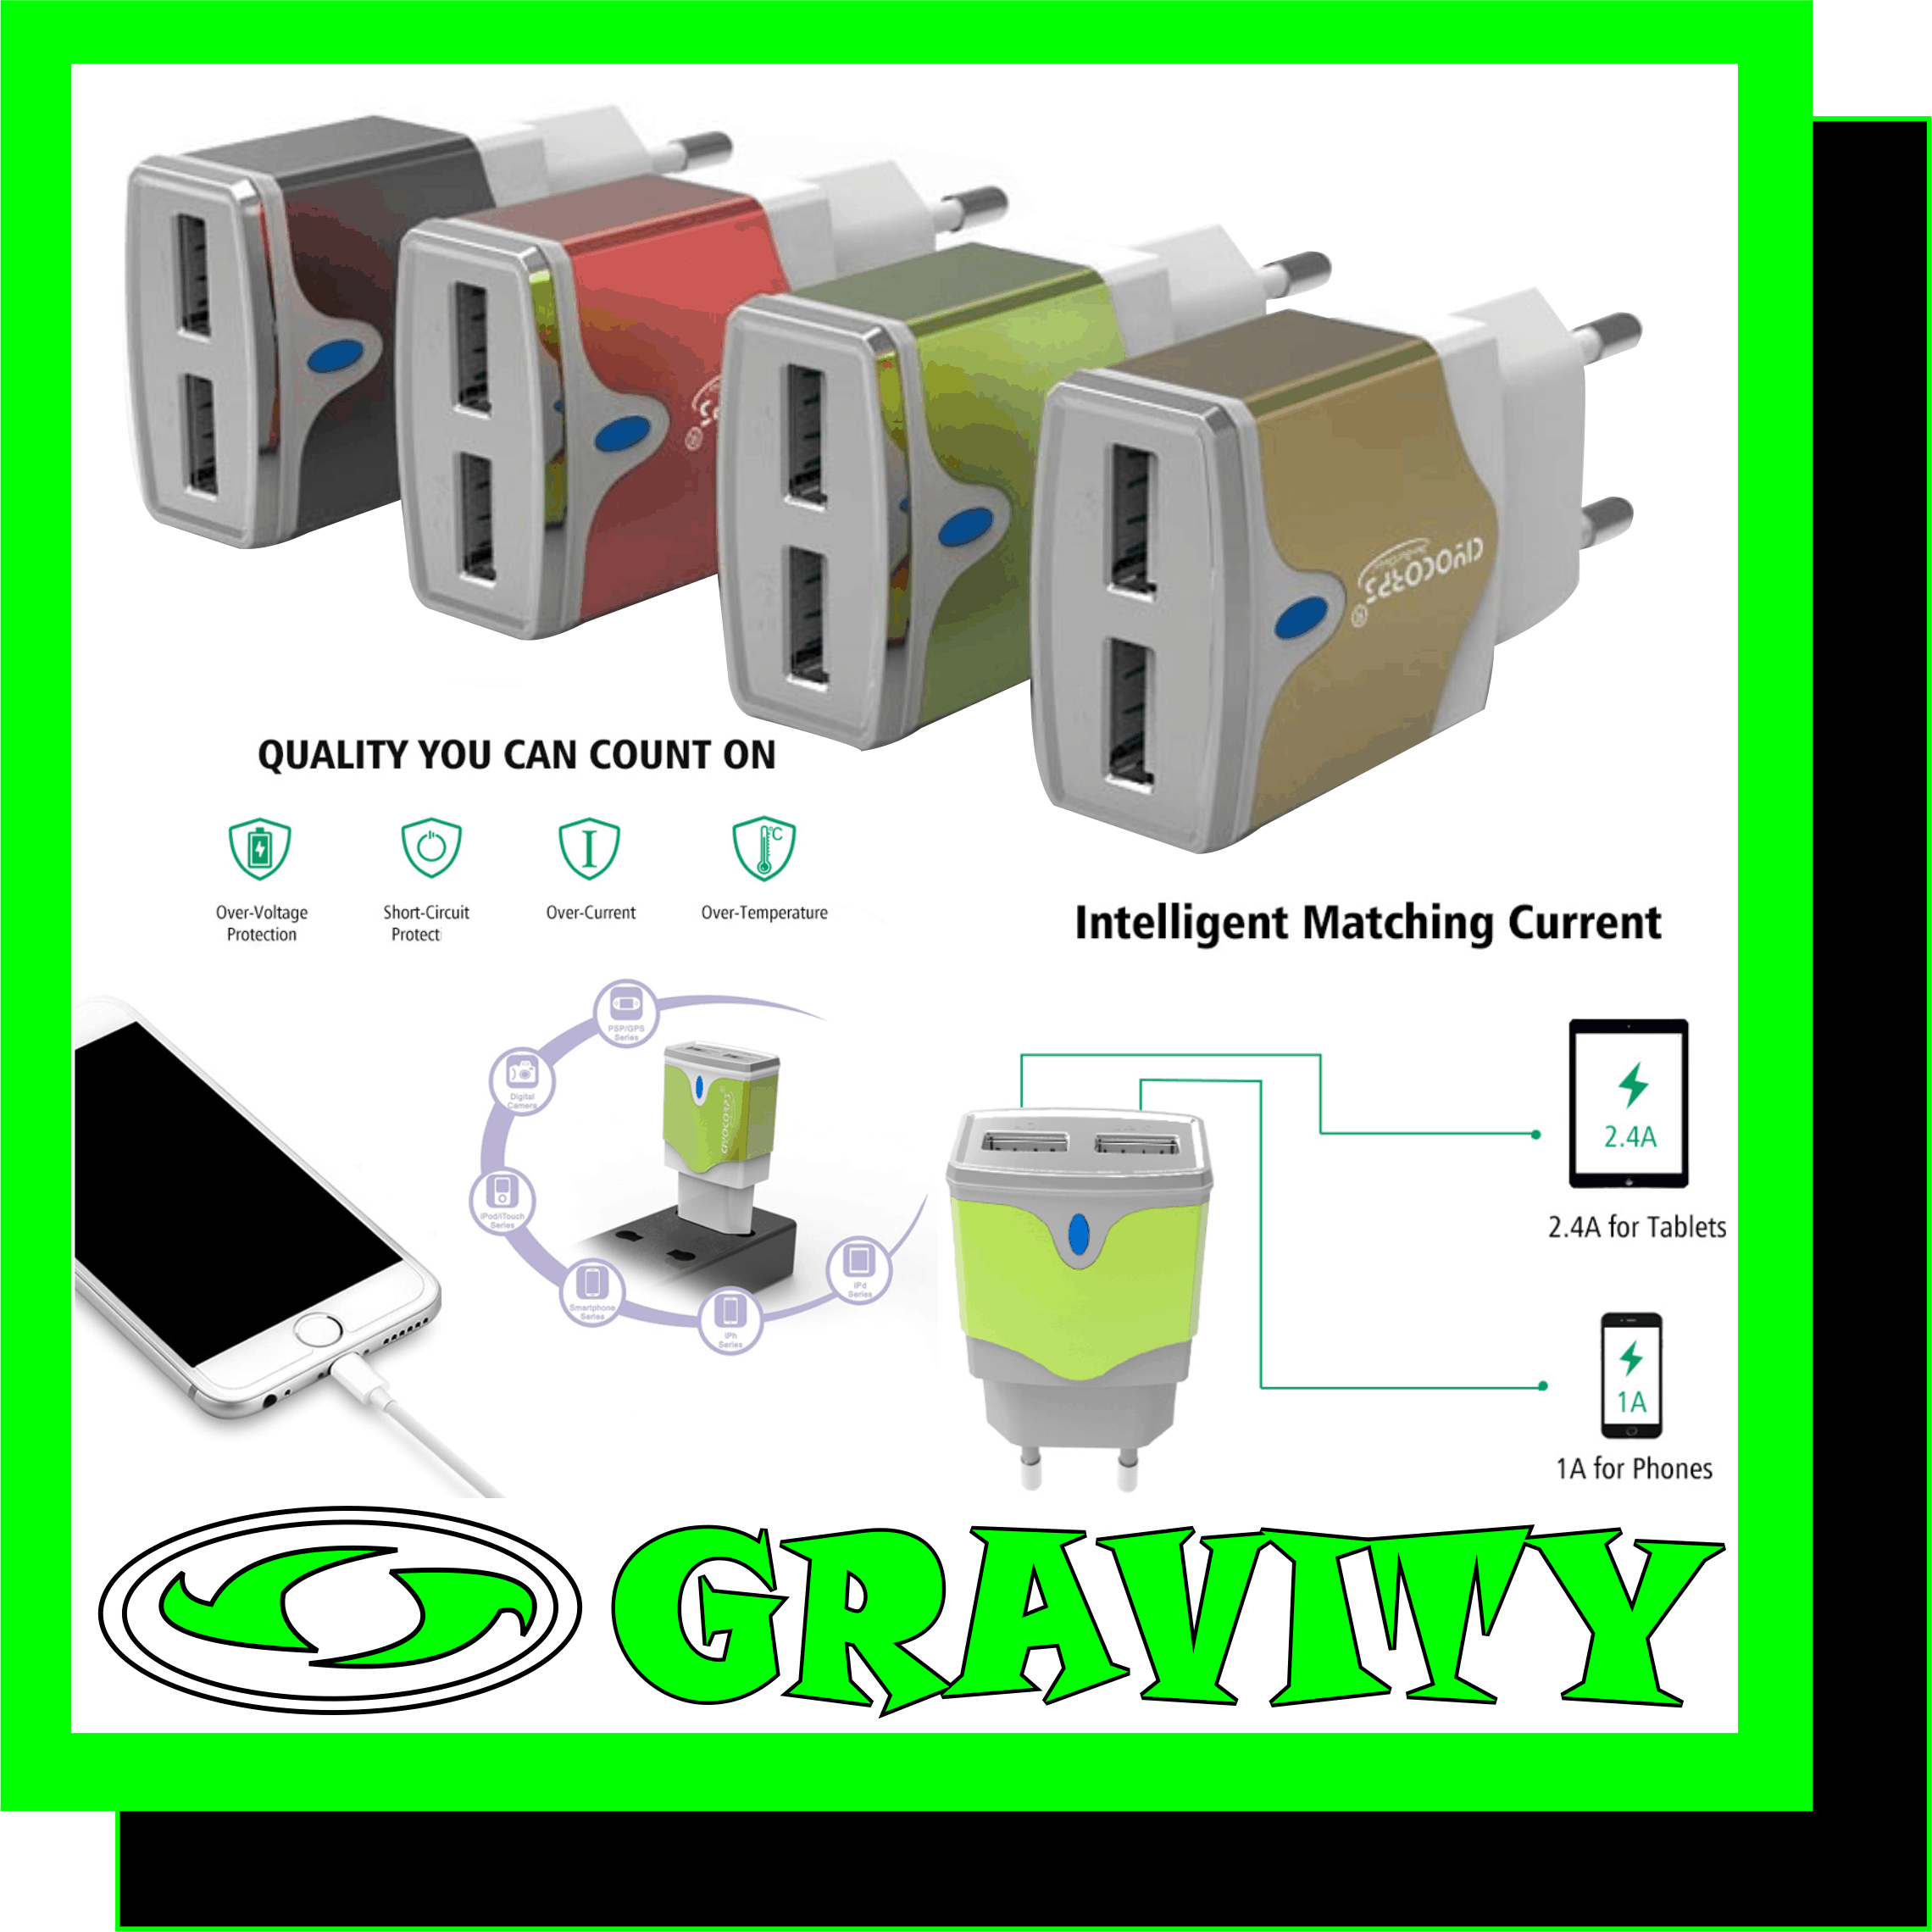 Product Name: Dual USB Travel & Wall Universal USB Phone Charger  Input Specifications: EU Plug-in  Input:AC 110-240v  Output:5V/ One USB is 2.4A(MAX); Other is 1A  Material: Aluminium alloy  Feature: LED Indicator  Suitable: For Iphone 7 plus  Samsung  Nokia  LG Google Nexus Xiaomi Huawei  Phone Devices